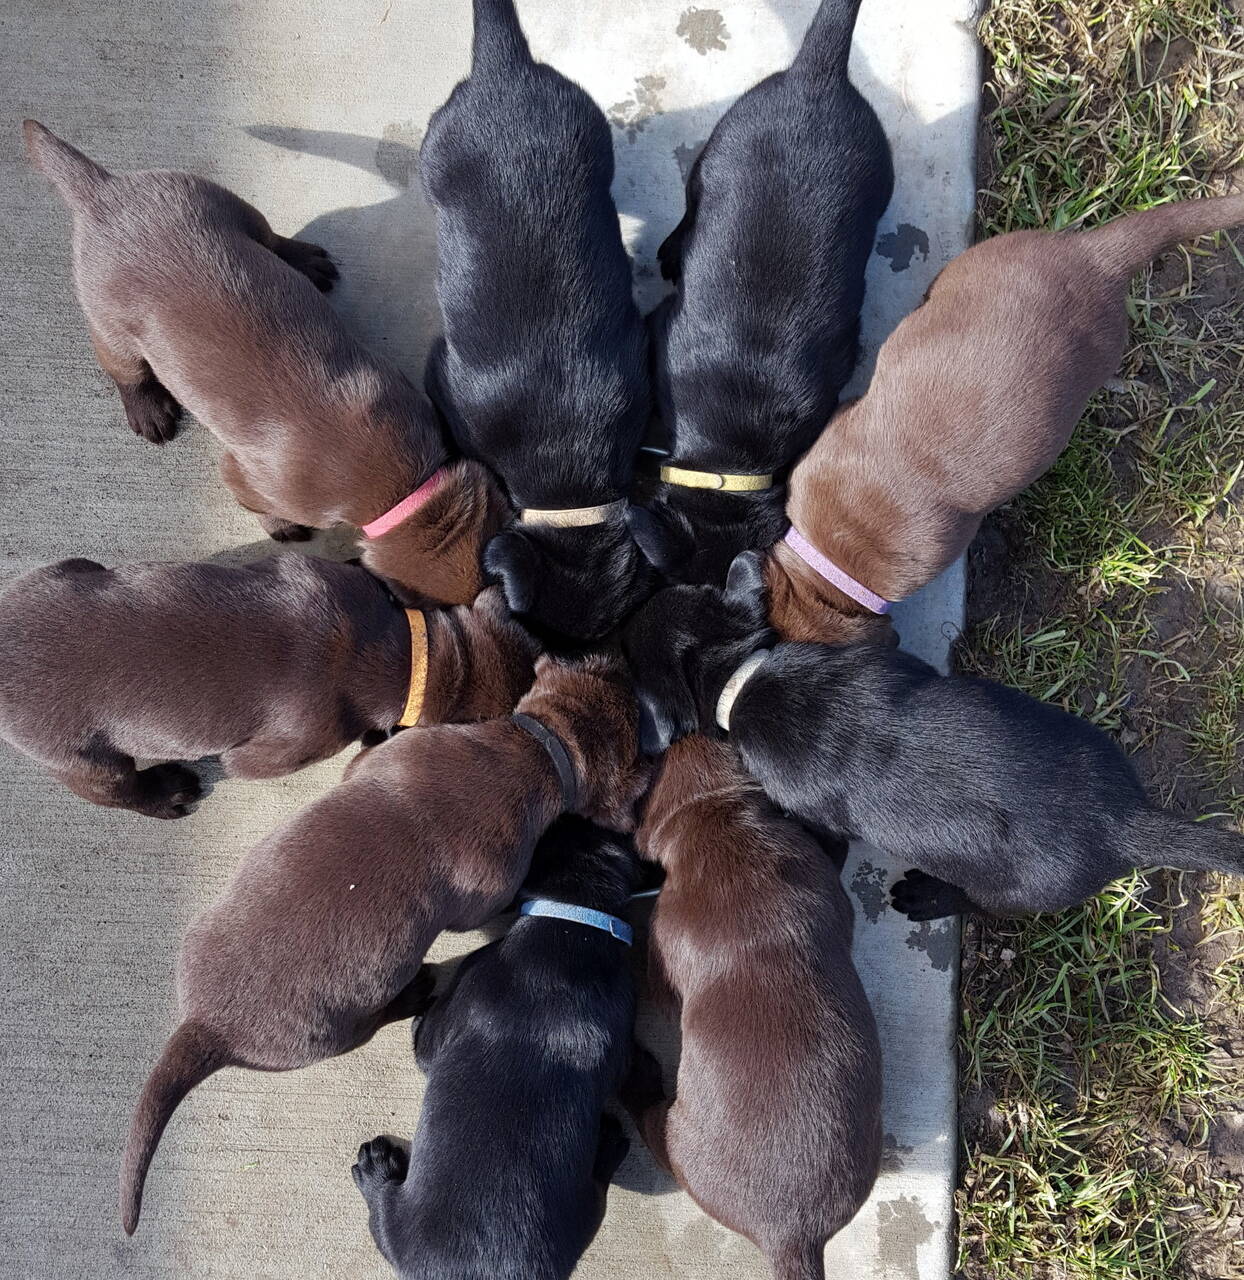 lab puppies for sale near me yard